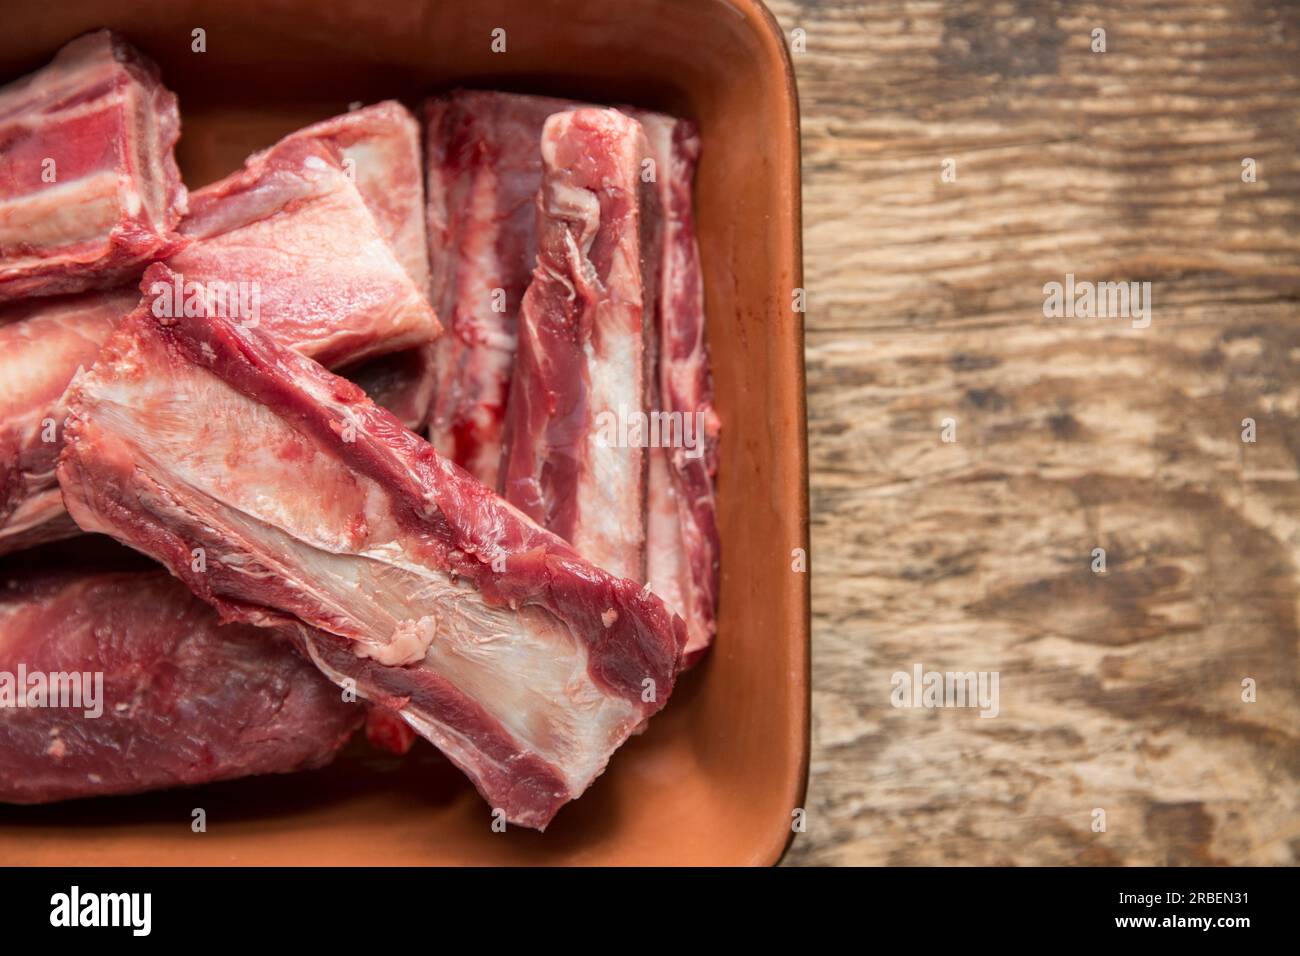 Raw beef ribs that will be used to make a stew. Beef ribs are generally one of the cheaper cuts of beef.  England UK GB Stock Photo